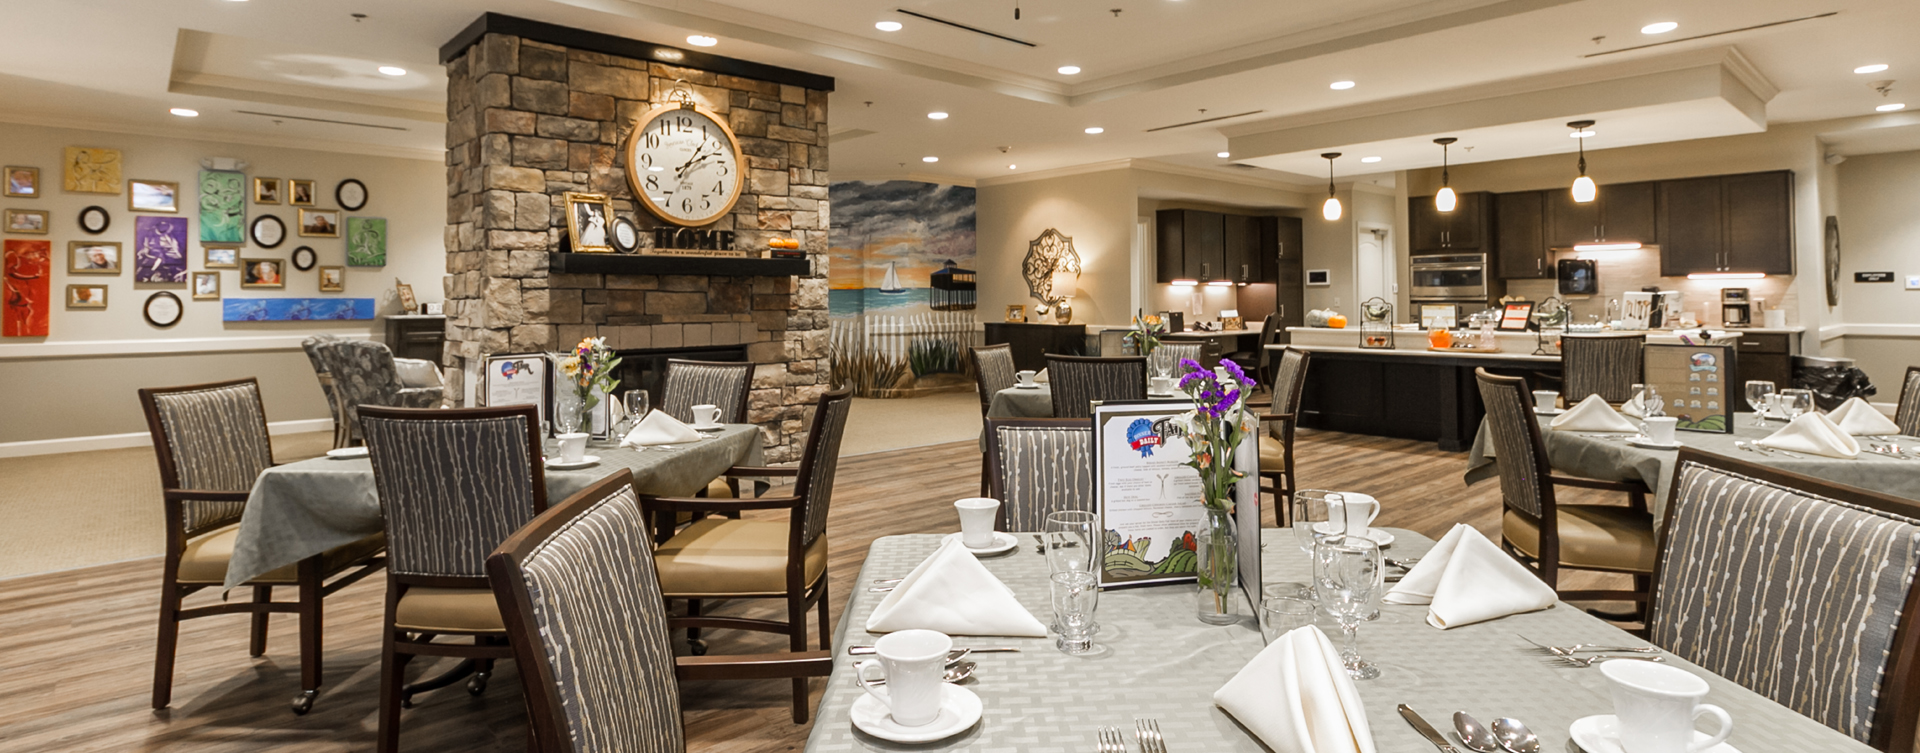 Mary B’s country kitchen evokes a sense of home and reconnects residents to past life skills at Bickford of Virginia Beach